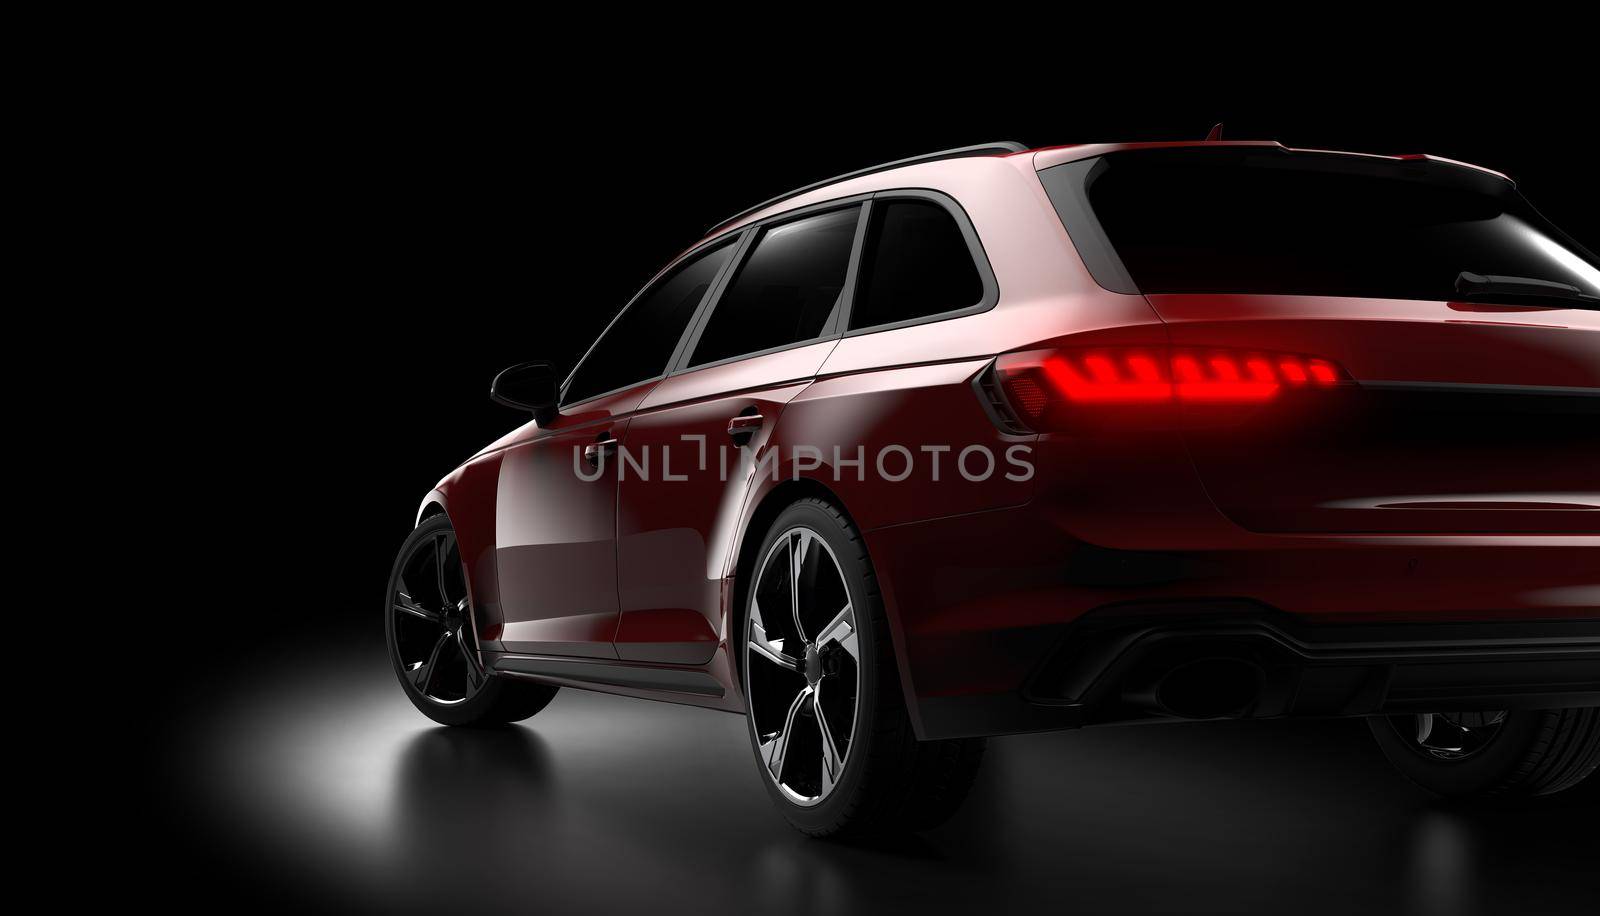 Back view of a red generic and unbranded car. 3D illustration by cla78